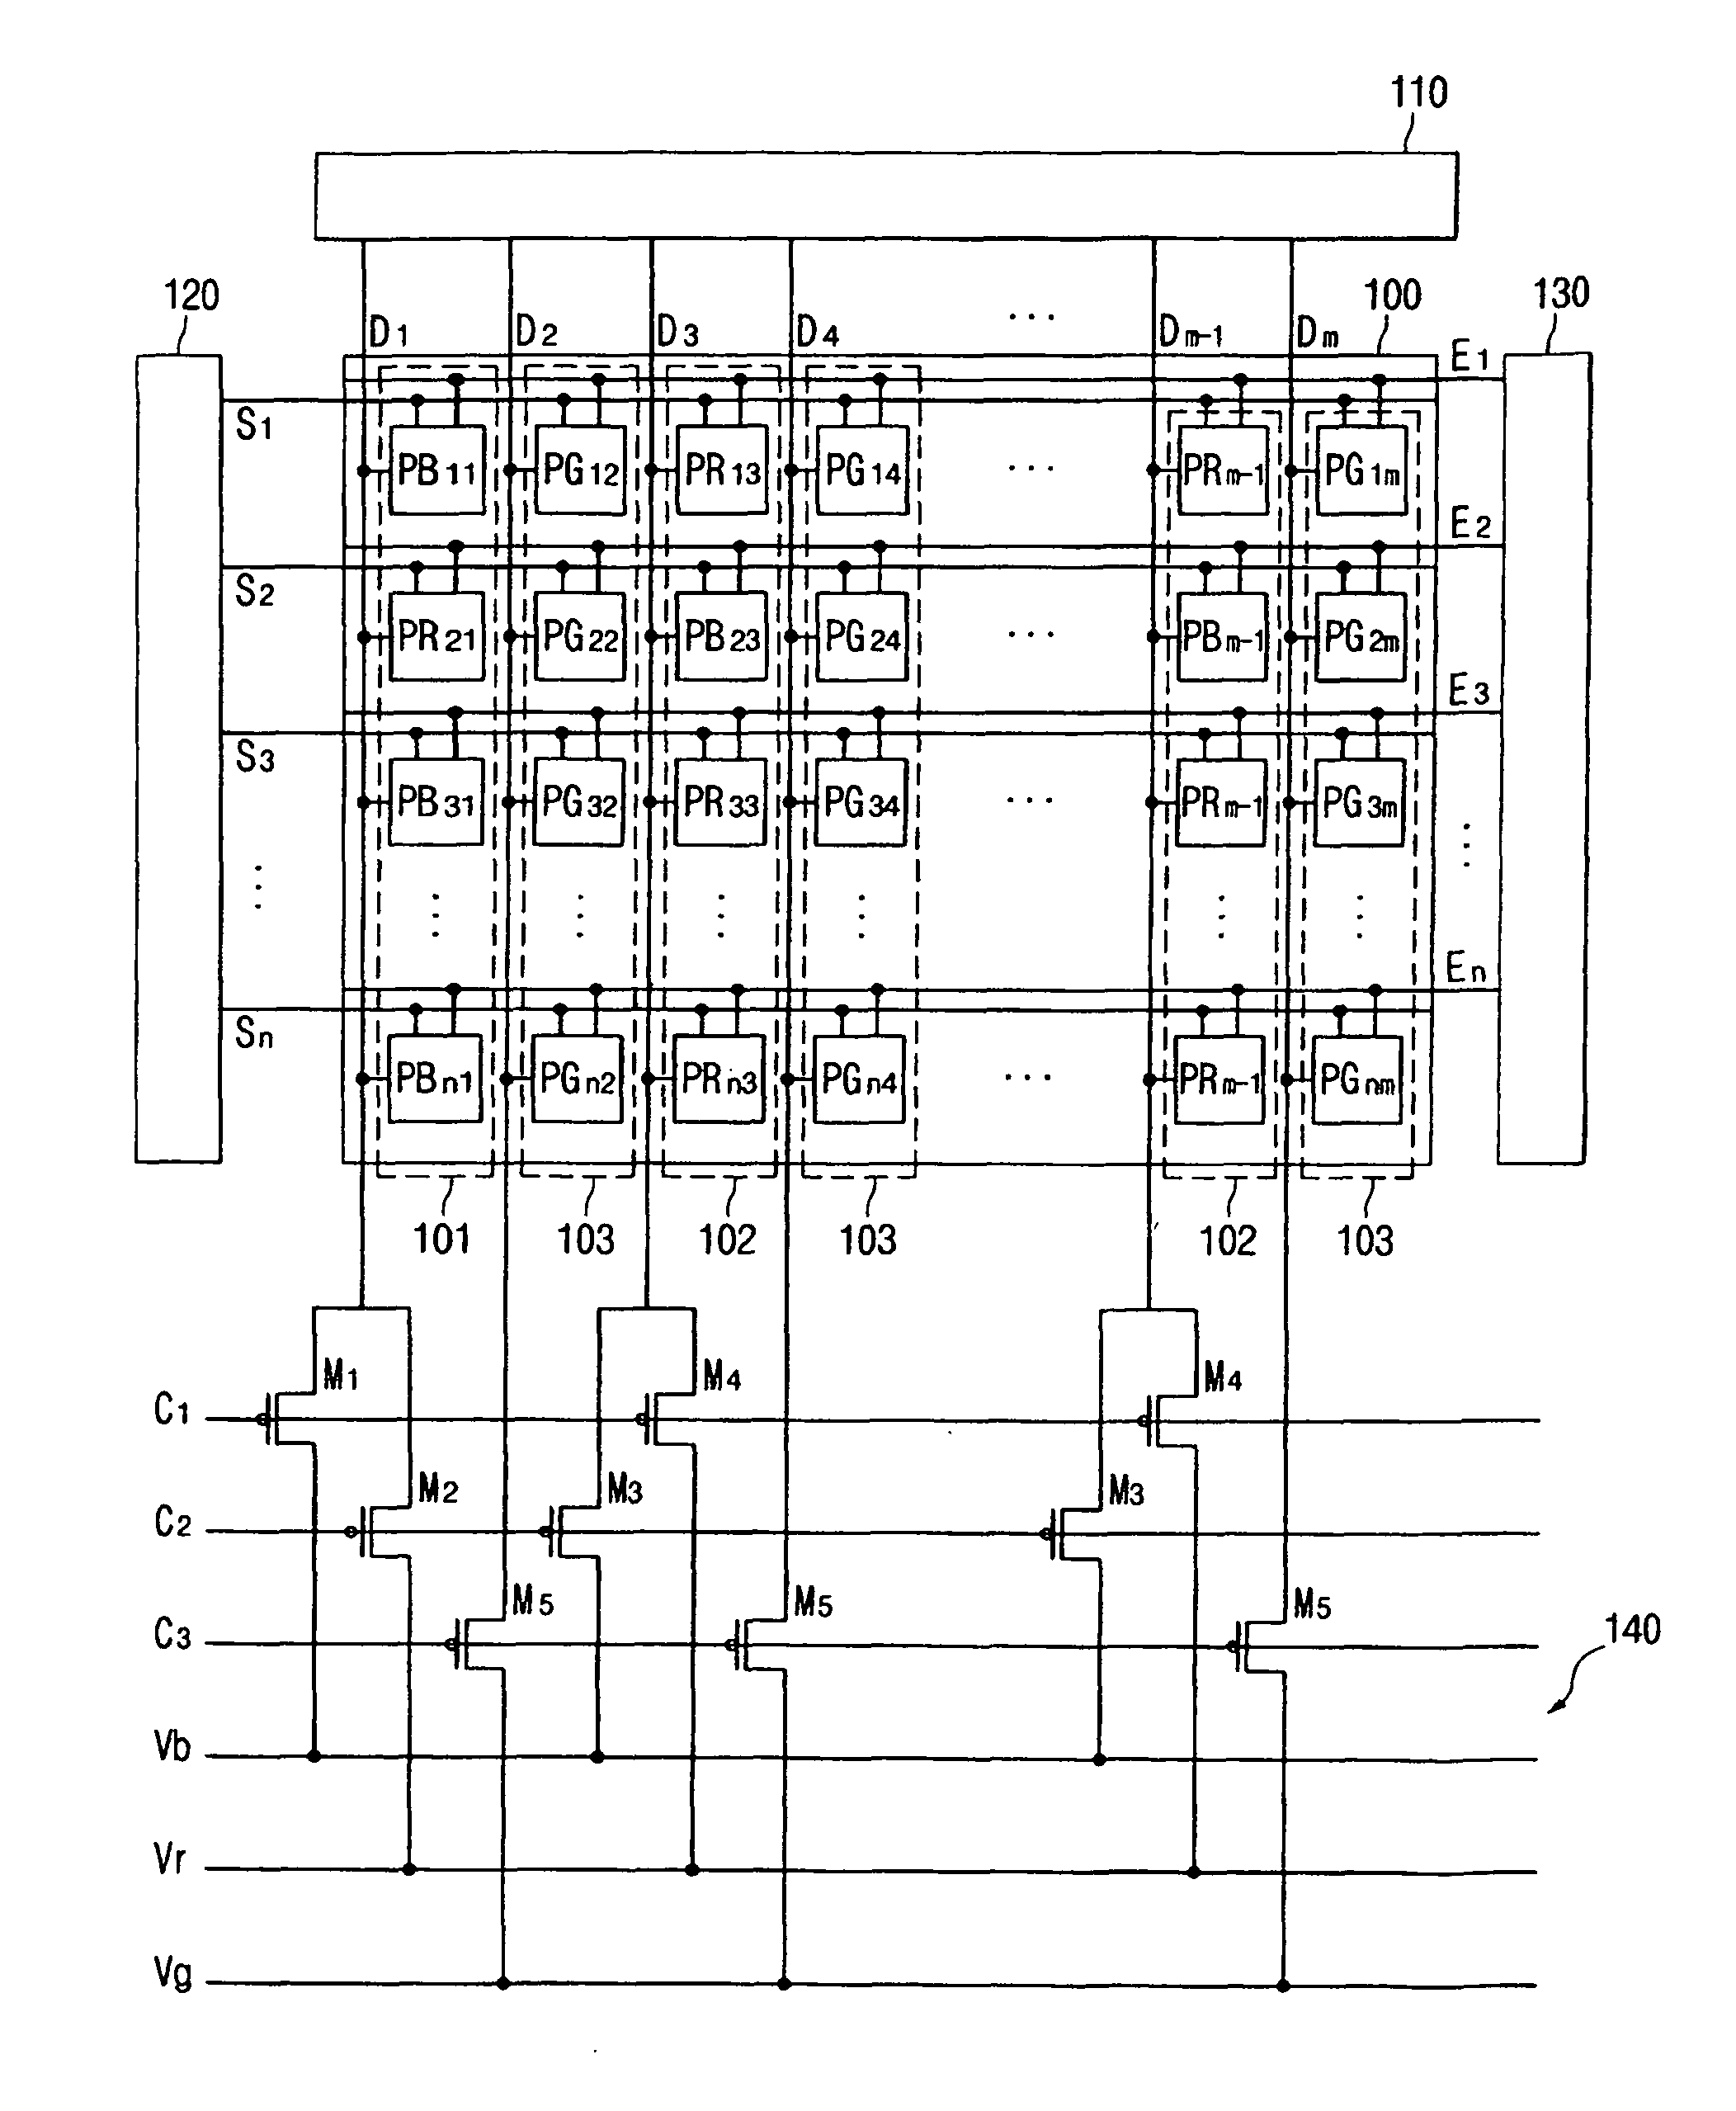 Flat panel display device, method of aging the same, and method of testing lighting of the same